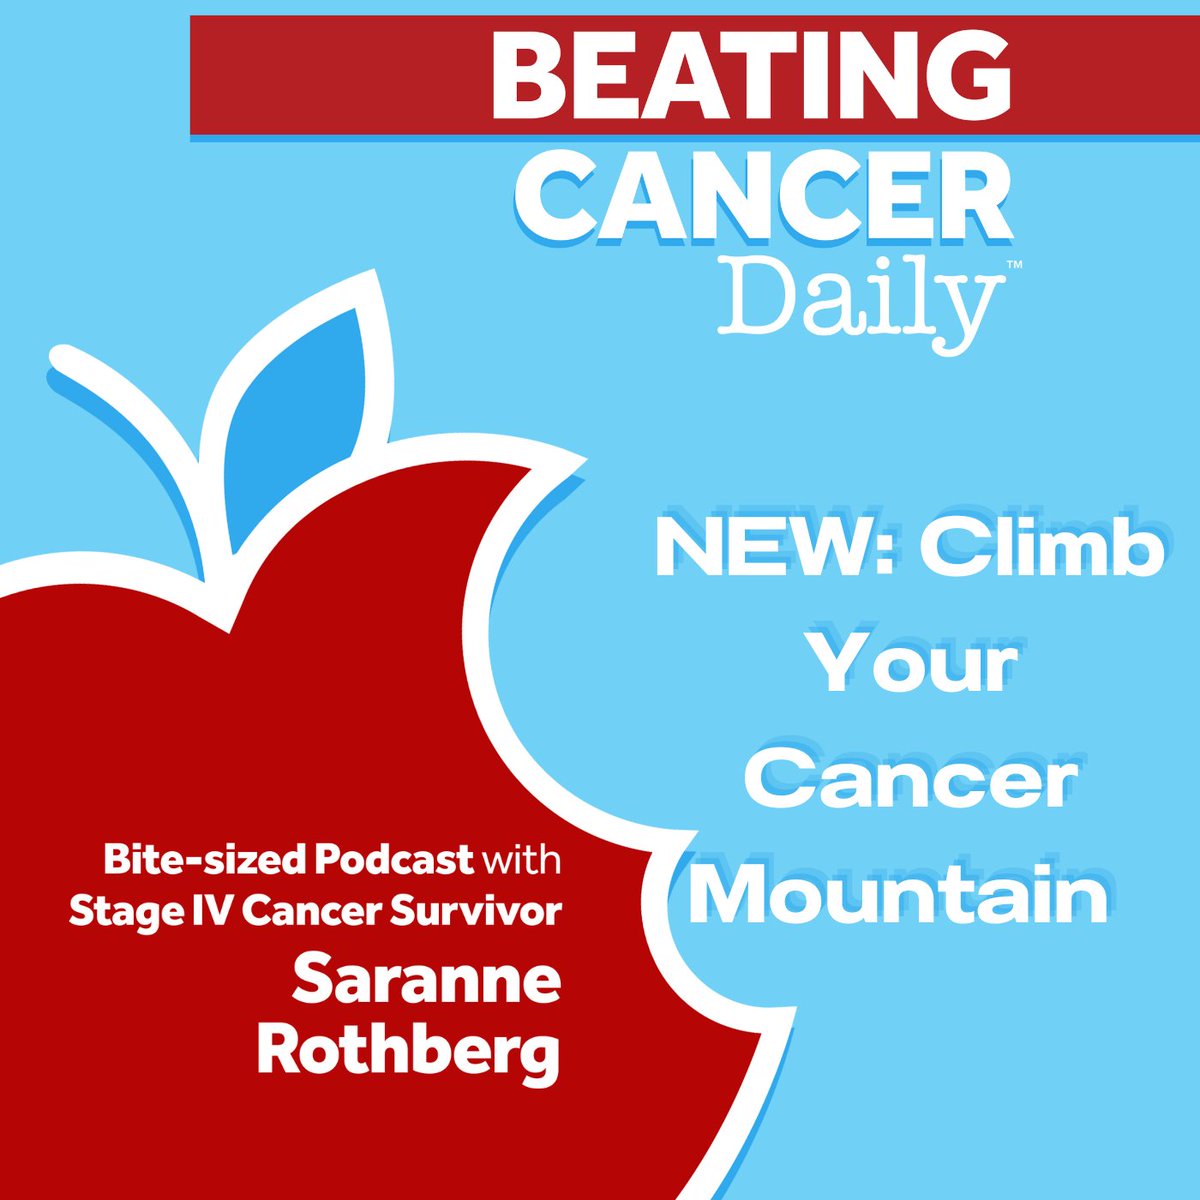 Today on #BeatingCancerDaily, NEW: Climb Your Cancer Mountain 

Listen wherever you listen to podcasts. 
ComedyCures.org

#ComedyCures #LaughDaily #InstaLaugh #laughtherapy #NonProfit #nonprofitlife #standupcomedian #survivor #remission #cancersurvivor #cancertreatment